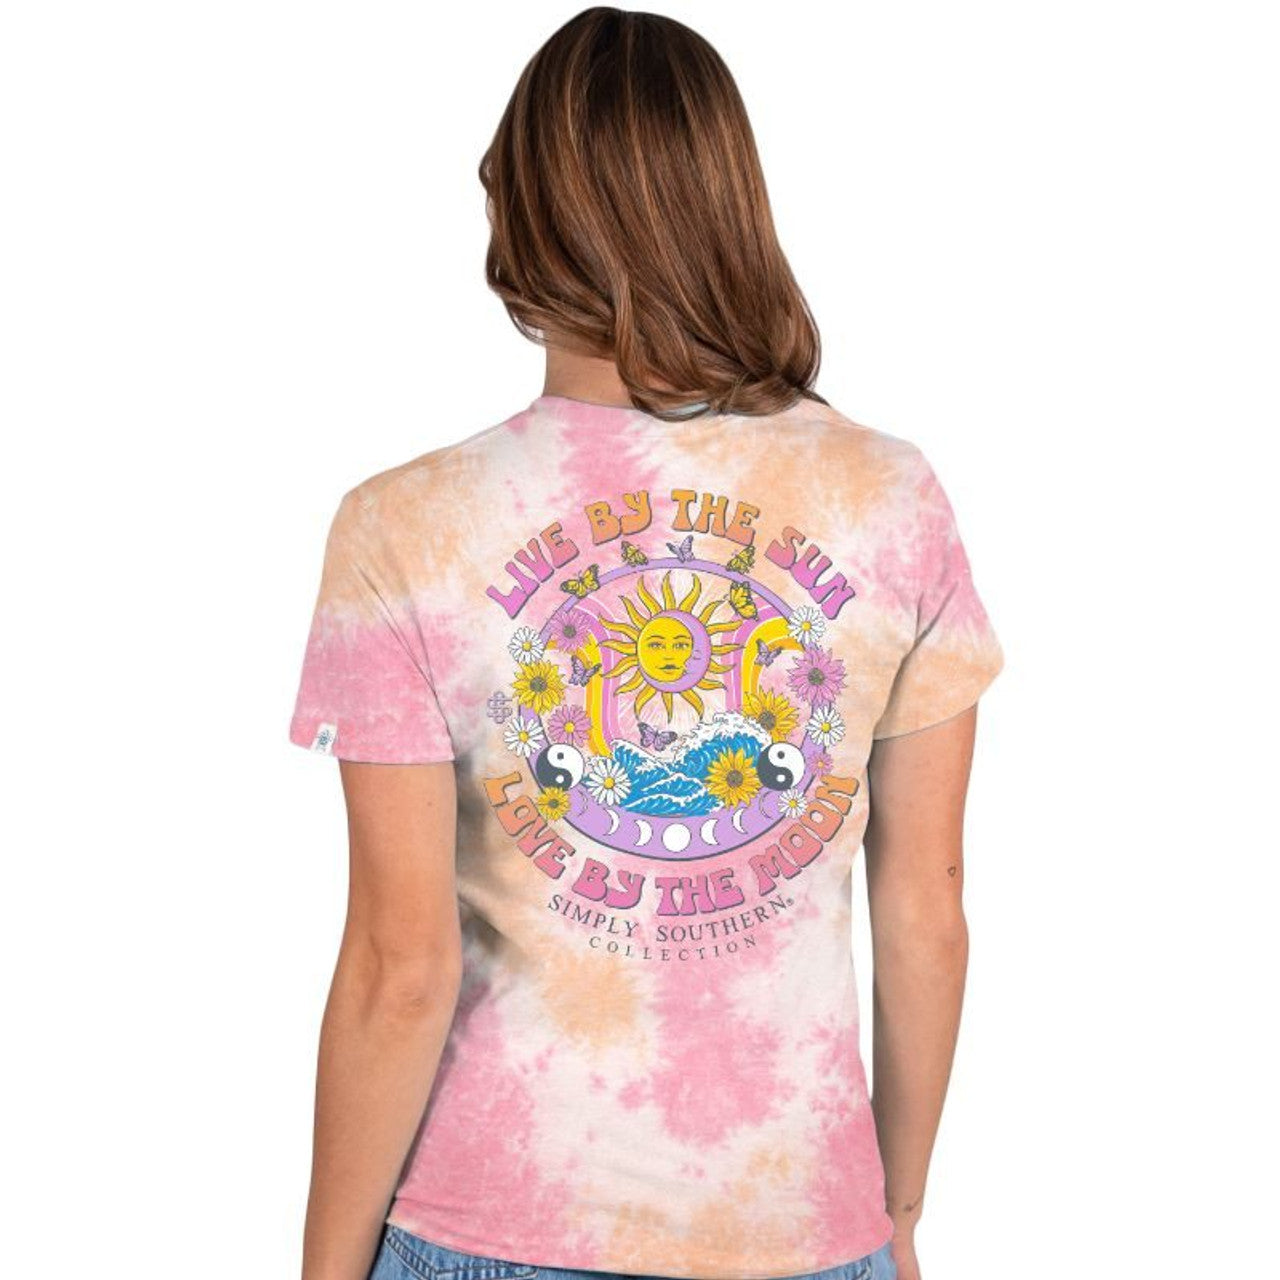 Simply Southern Sunmoon   Live by the Sun  Love by the Moon  Tropic  Women's T-Shirt  SS-SUNMOON-TROPIC